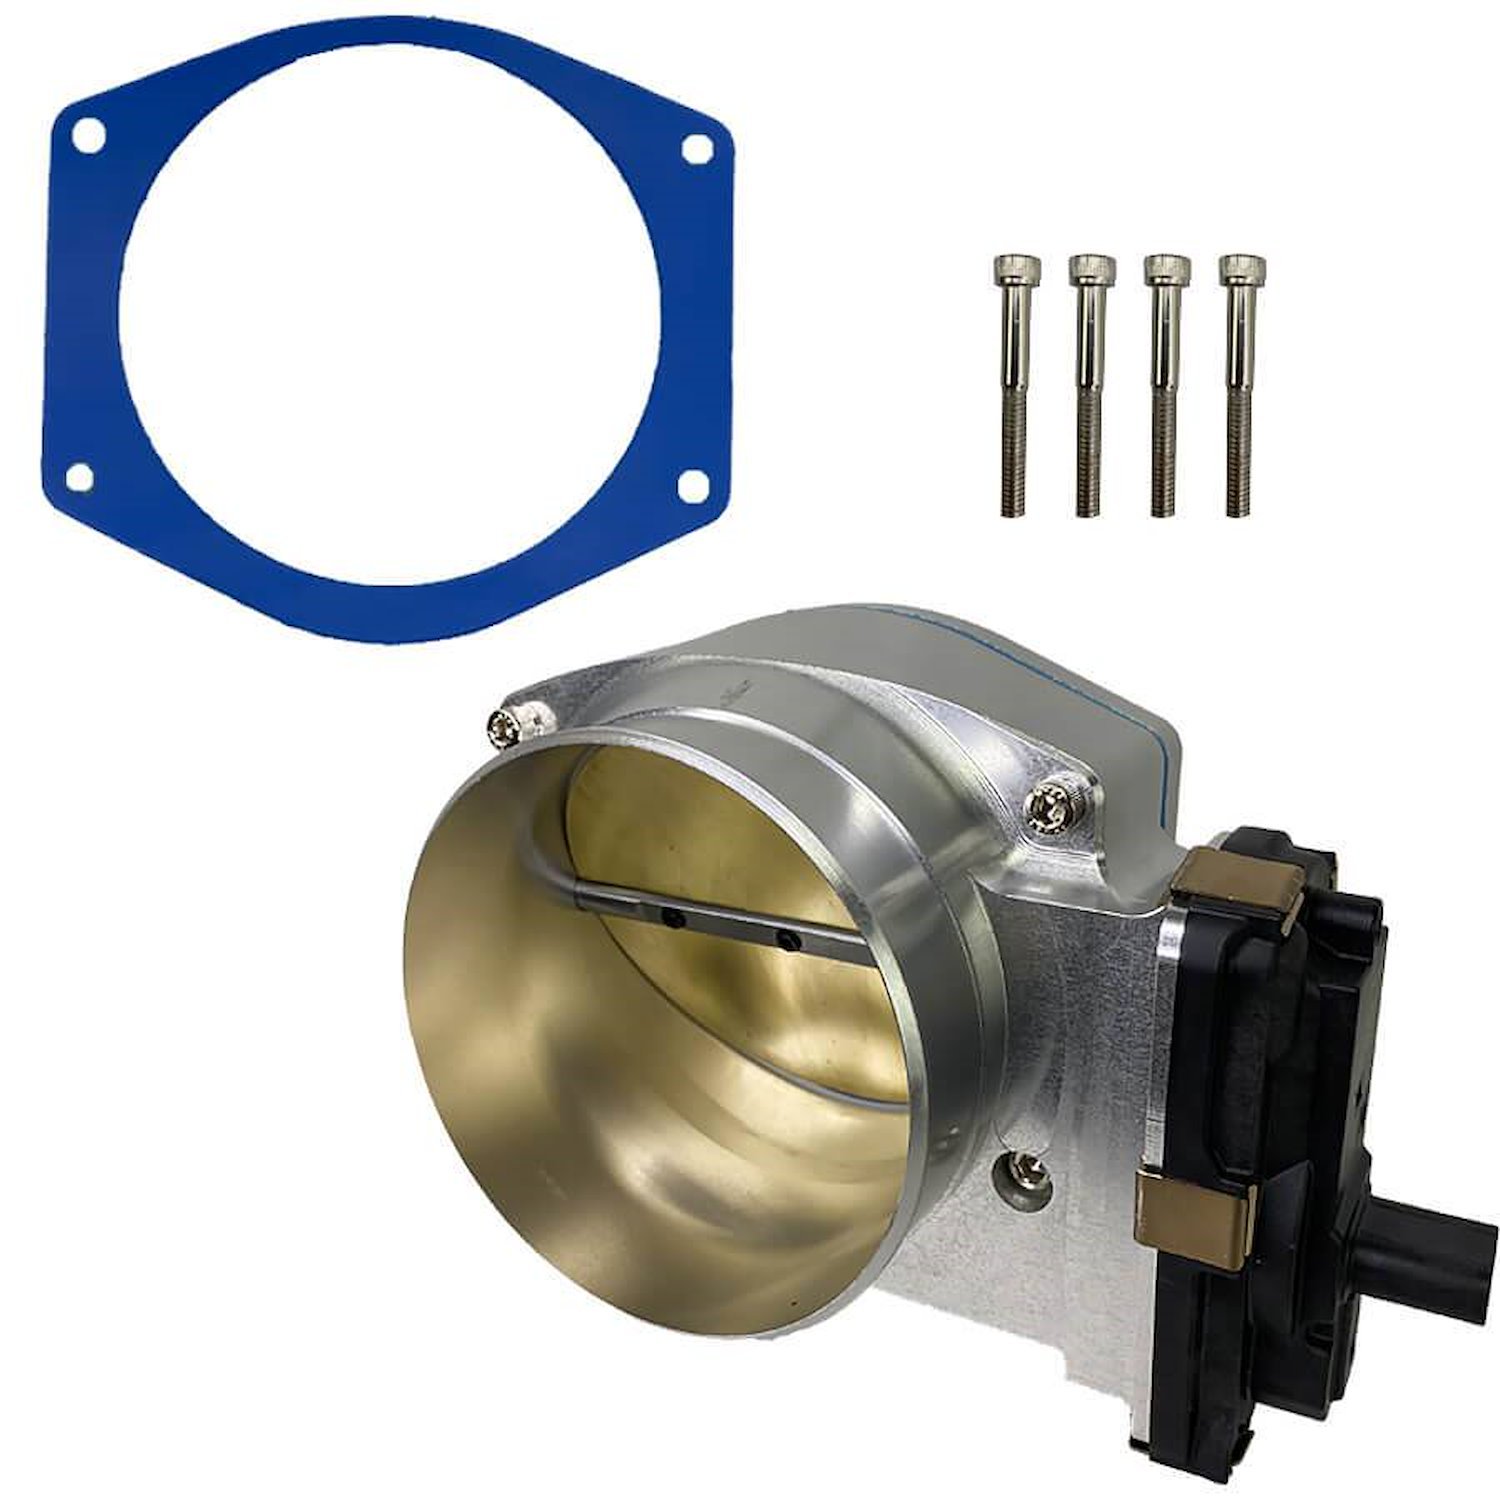 Drive-By-Wire Throttle Body GM LT1/LT4/LT5, 103 mm - Polished Finish